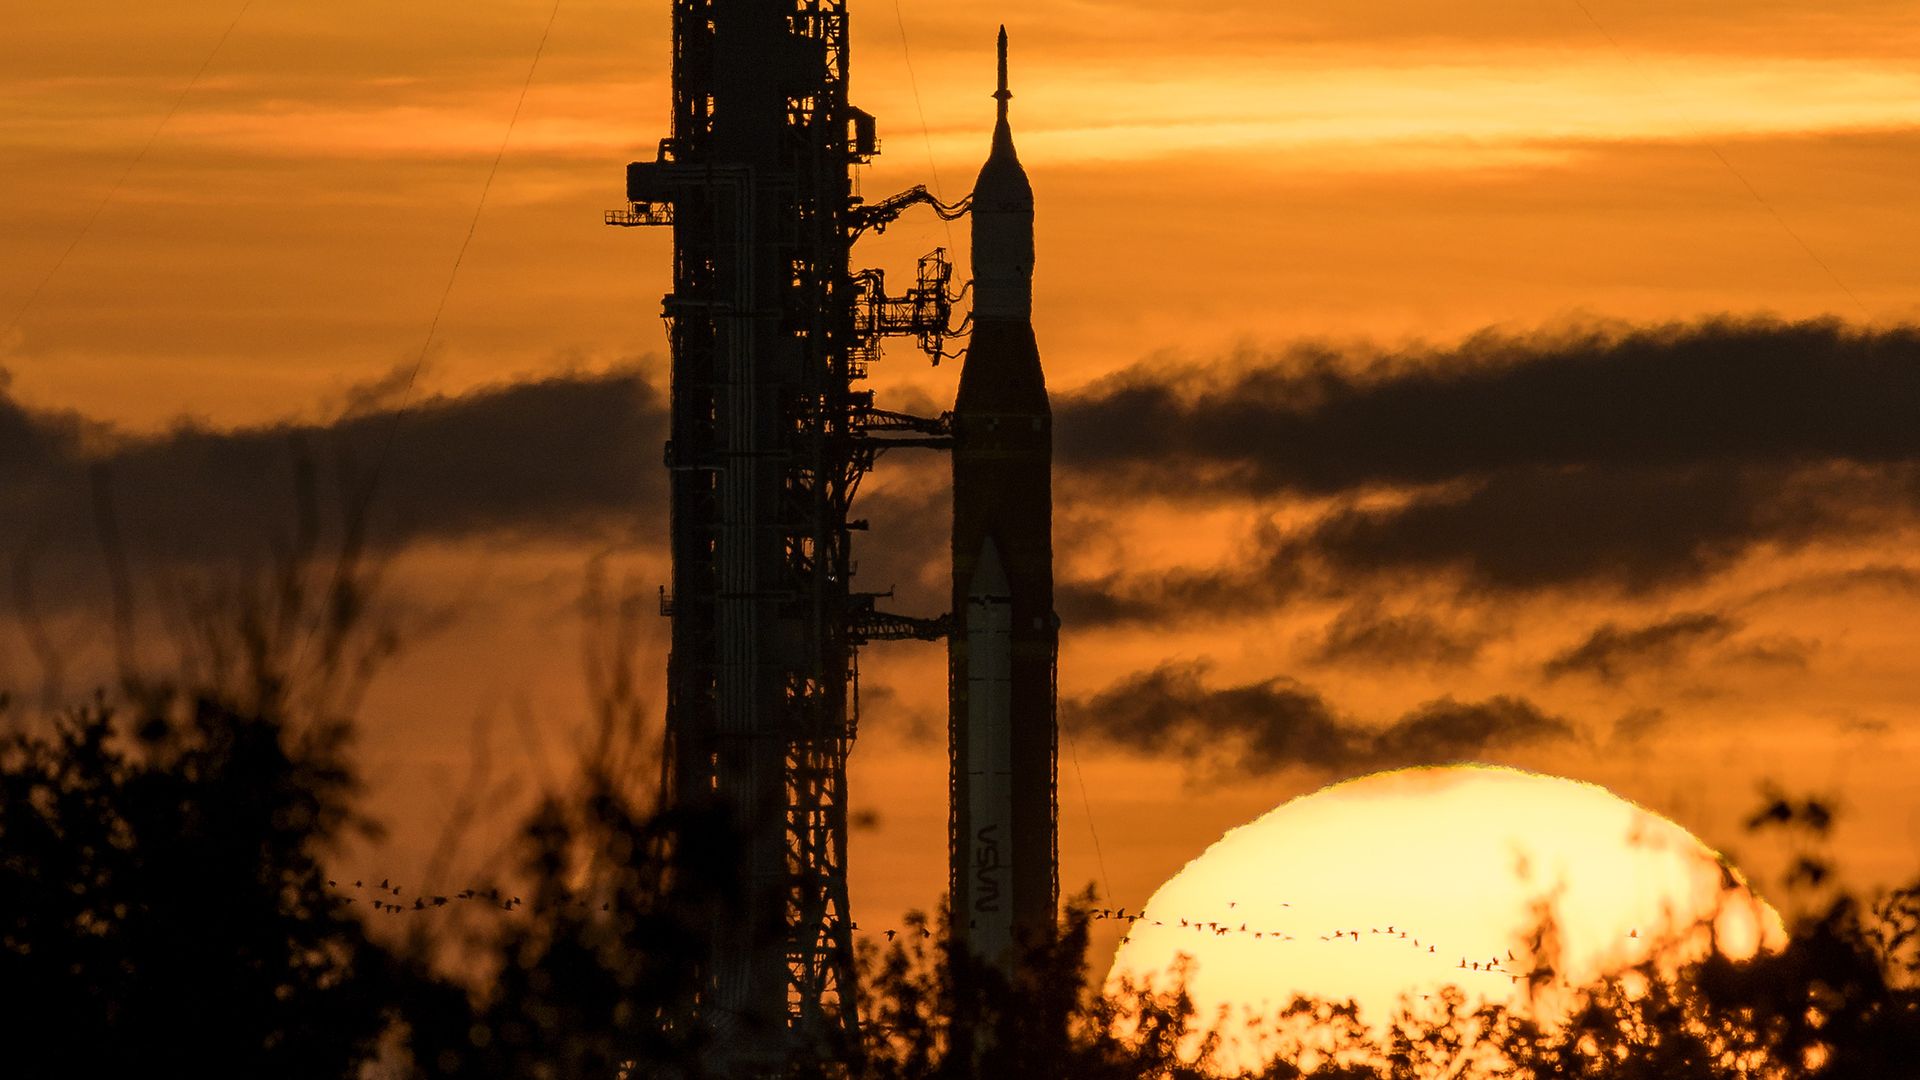 NASA's Space Launch System (SLS) rocket with the Orion spacecraft aboard is seen during sunrise atop a mobile launcher at Launch Pad 39B as preparations for launch continue